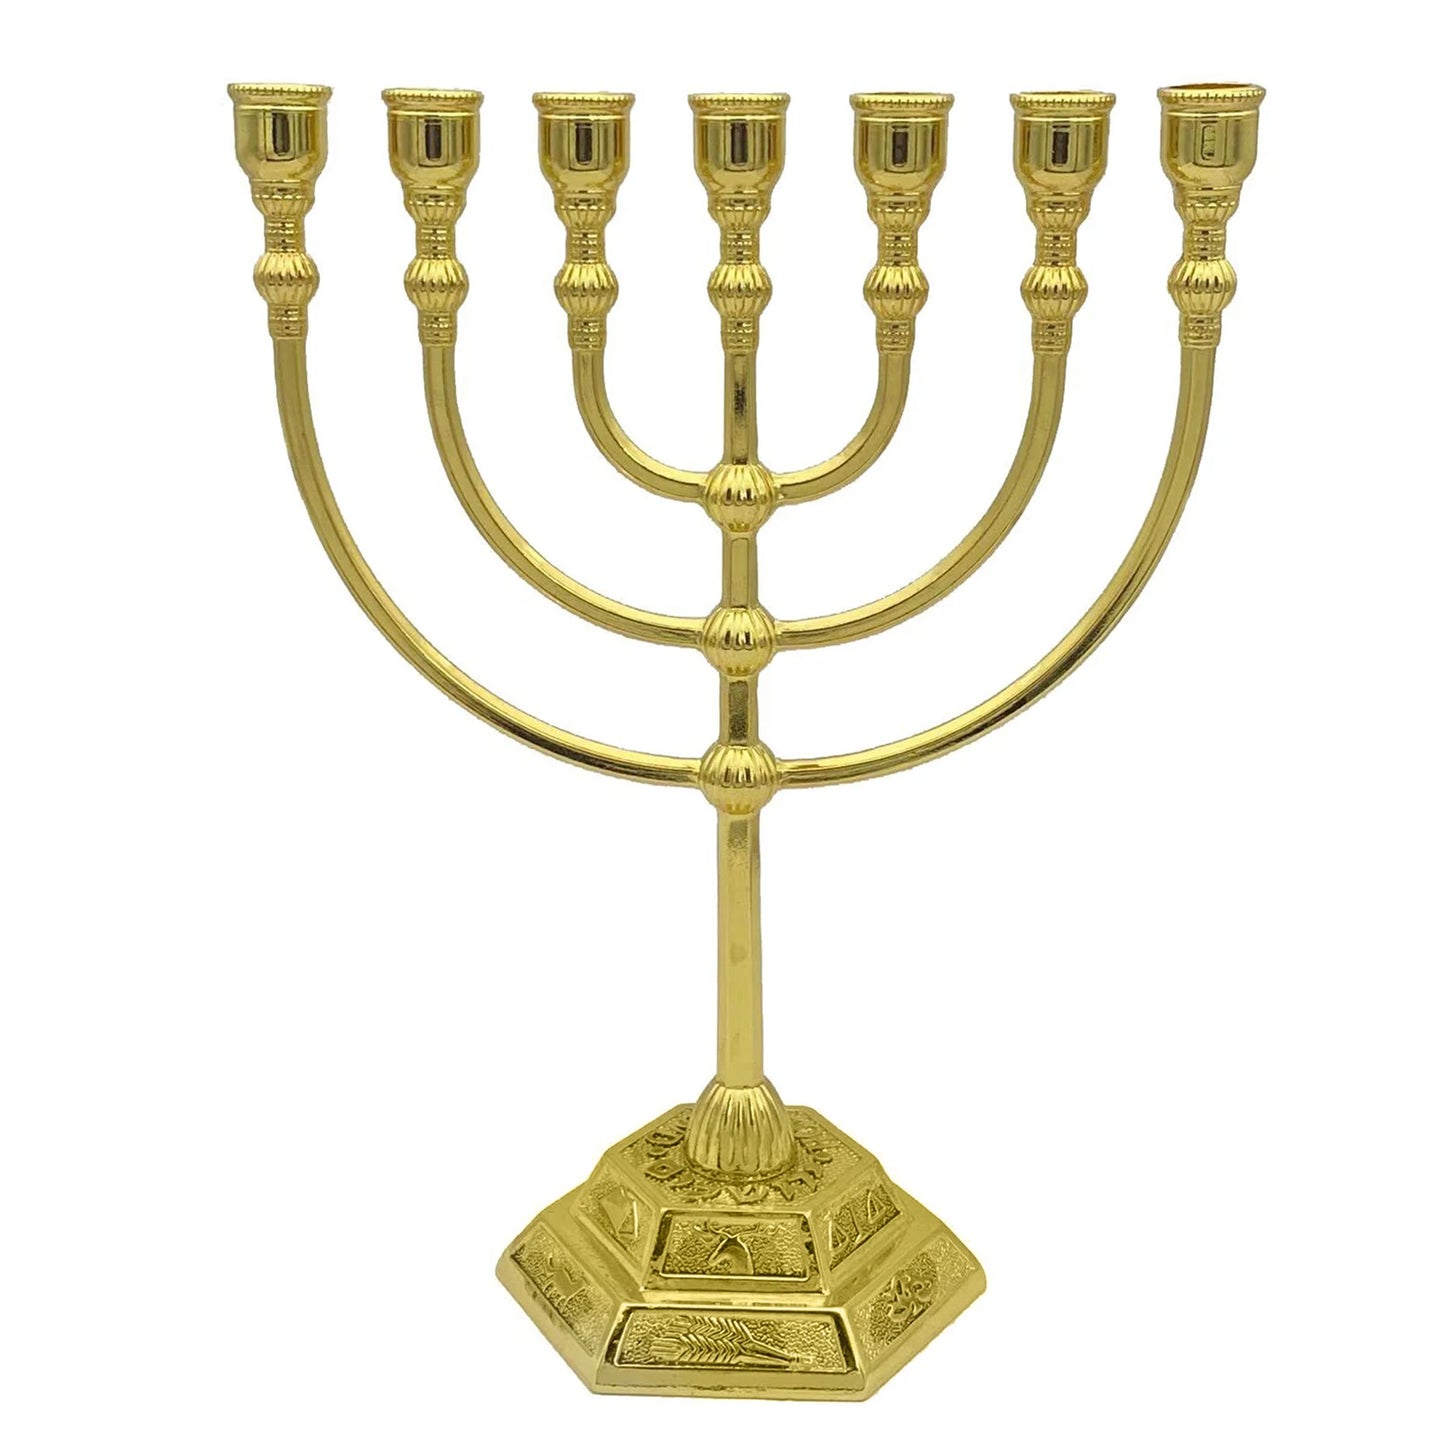 6.69-inch Height Antique Hanukkah Candle Stand 7 Branch Menorah Candle Holder Jerusalem Temple for Jewish Holiday Party Decor